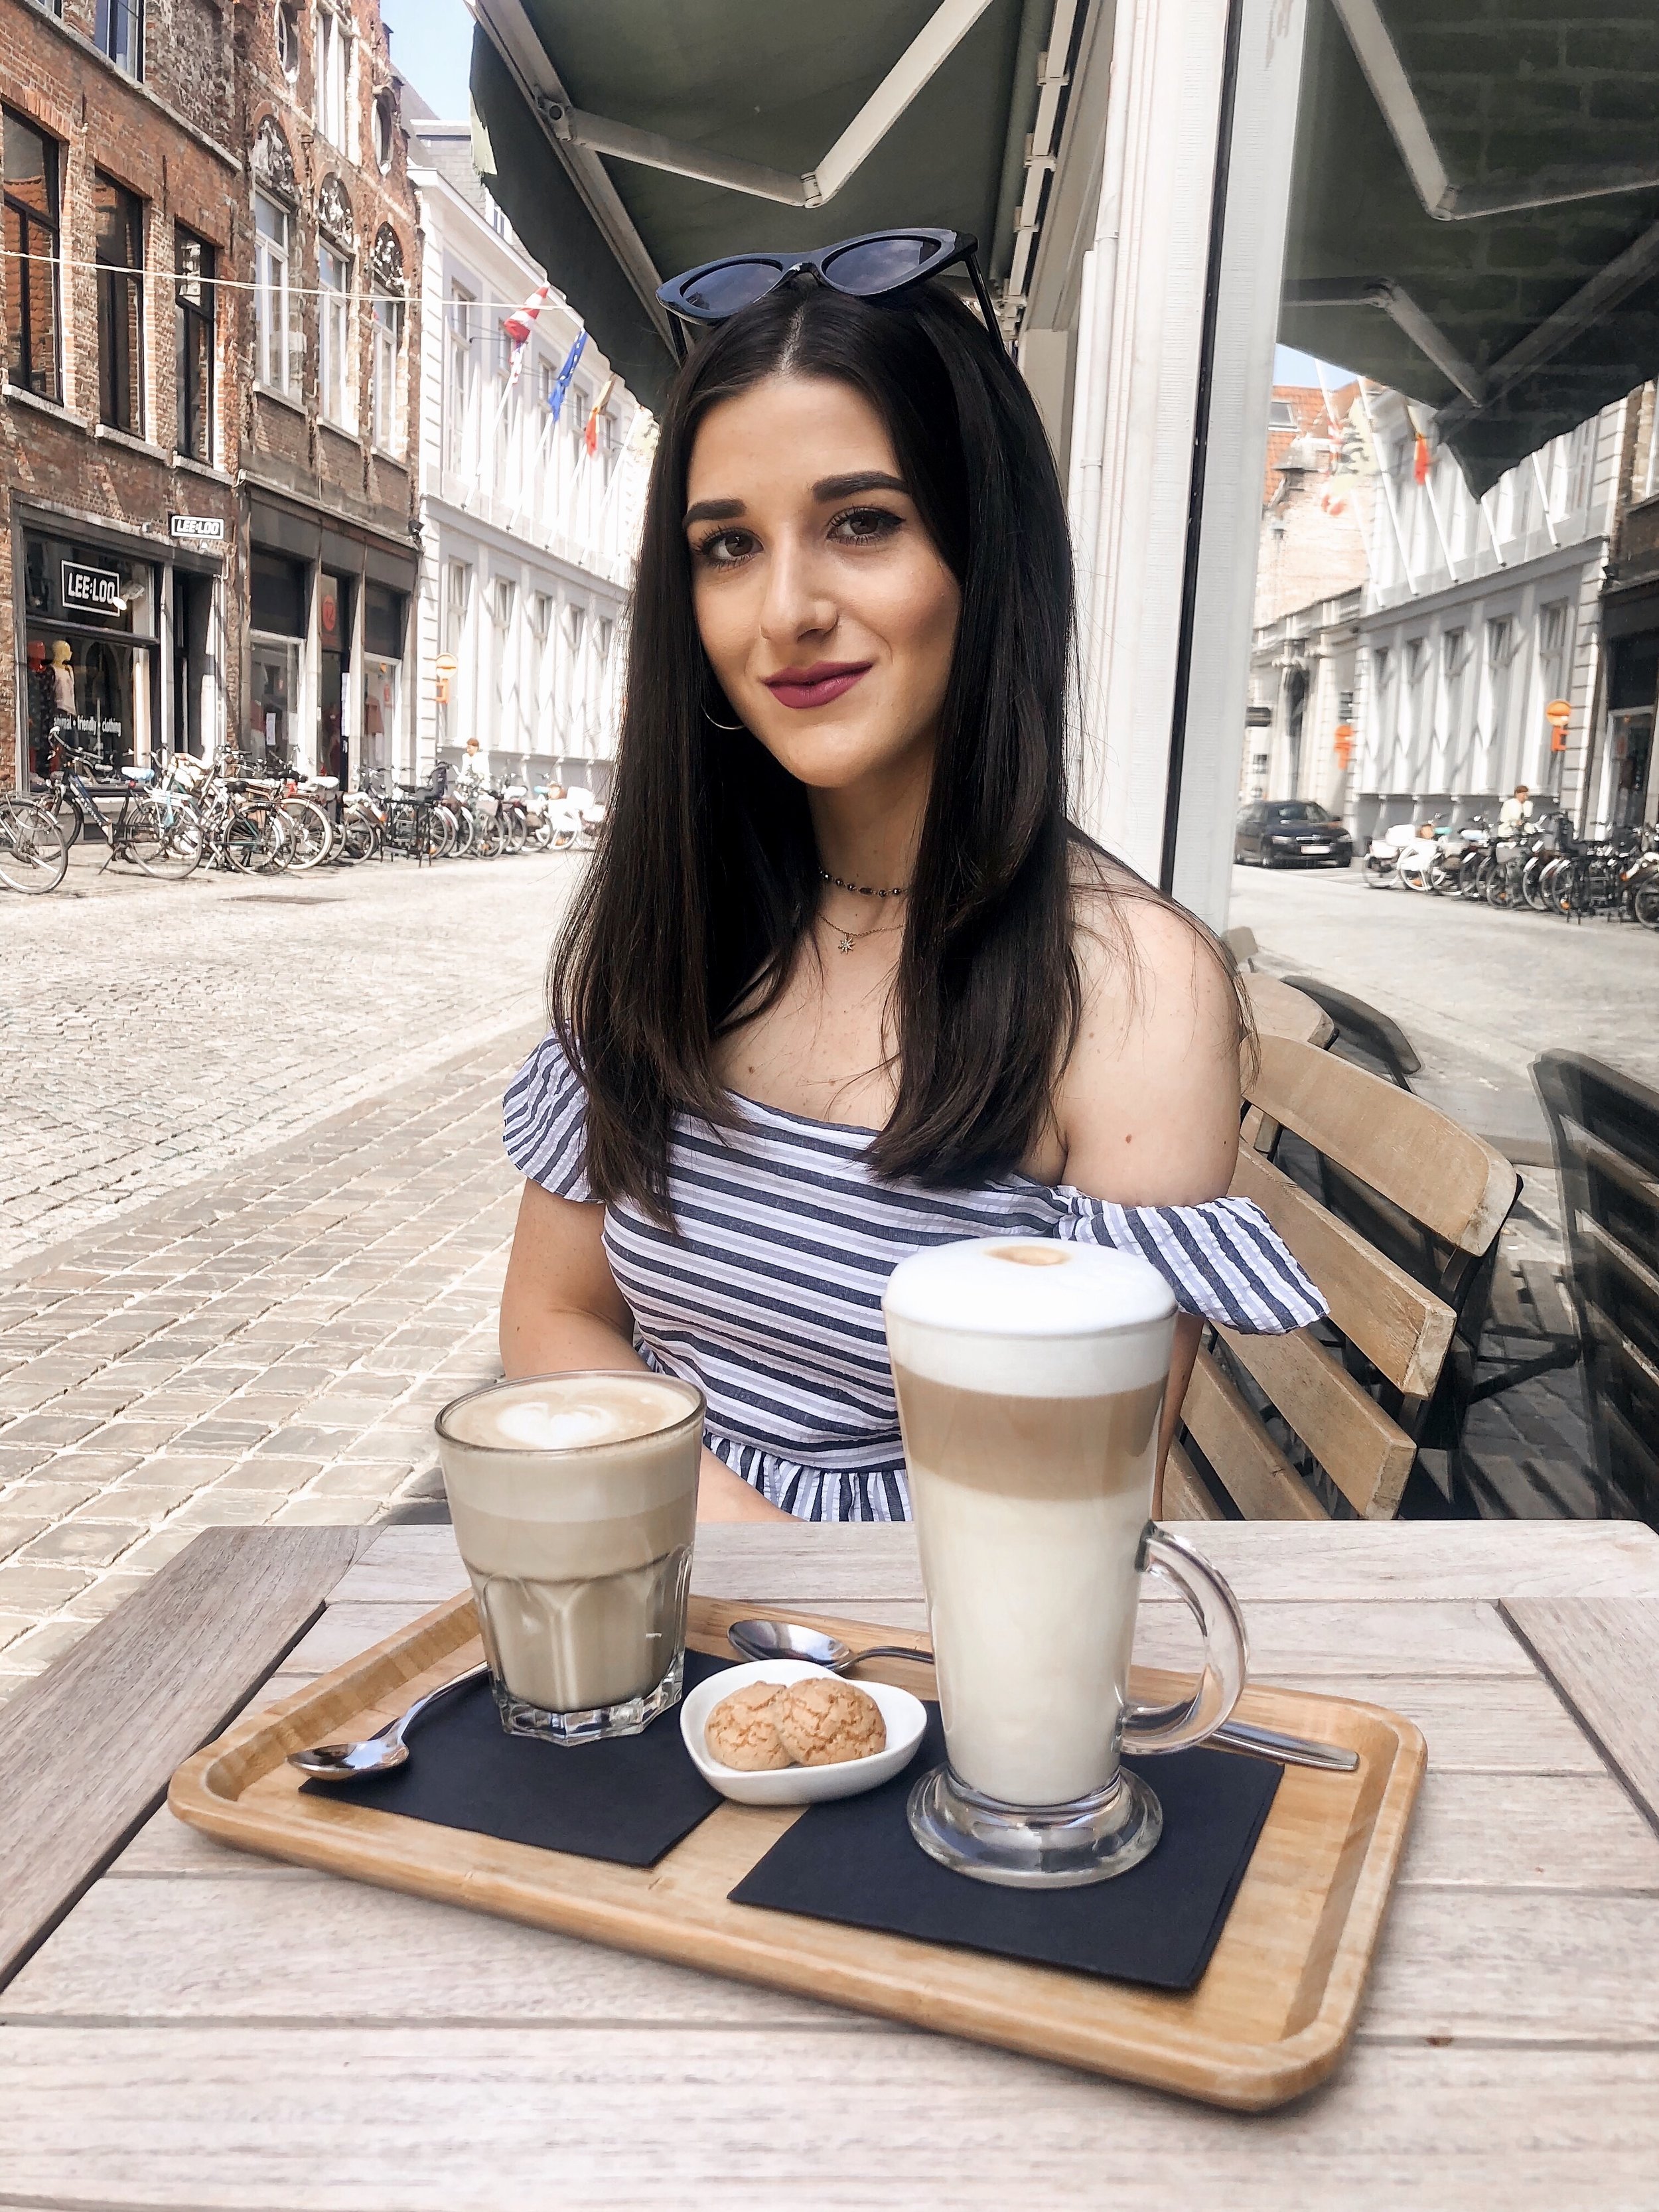 Belgium Travel Guide Bruges Ghent In 4 Days Esther Santer Fashion Blog NYC Street Style Blogger Outfit Sight Seeing Tourist Shop What How To Wear Expore What To Do Vacatiom Itinerary Short Stopover EuroTrip Europe Layover Summer Activities Suggestions.jpg